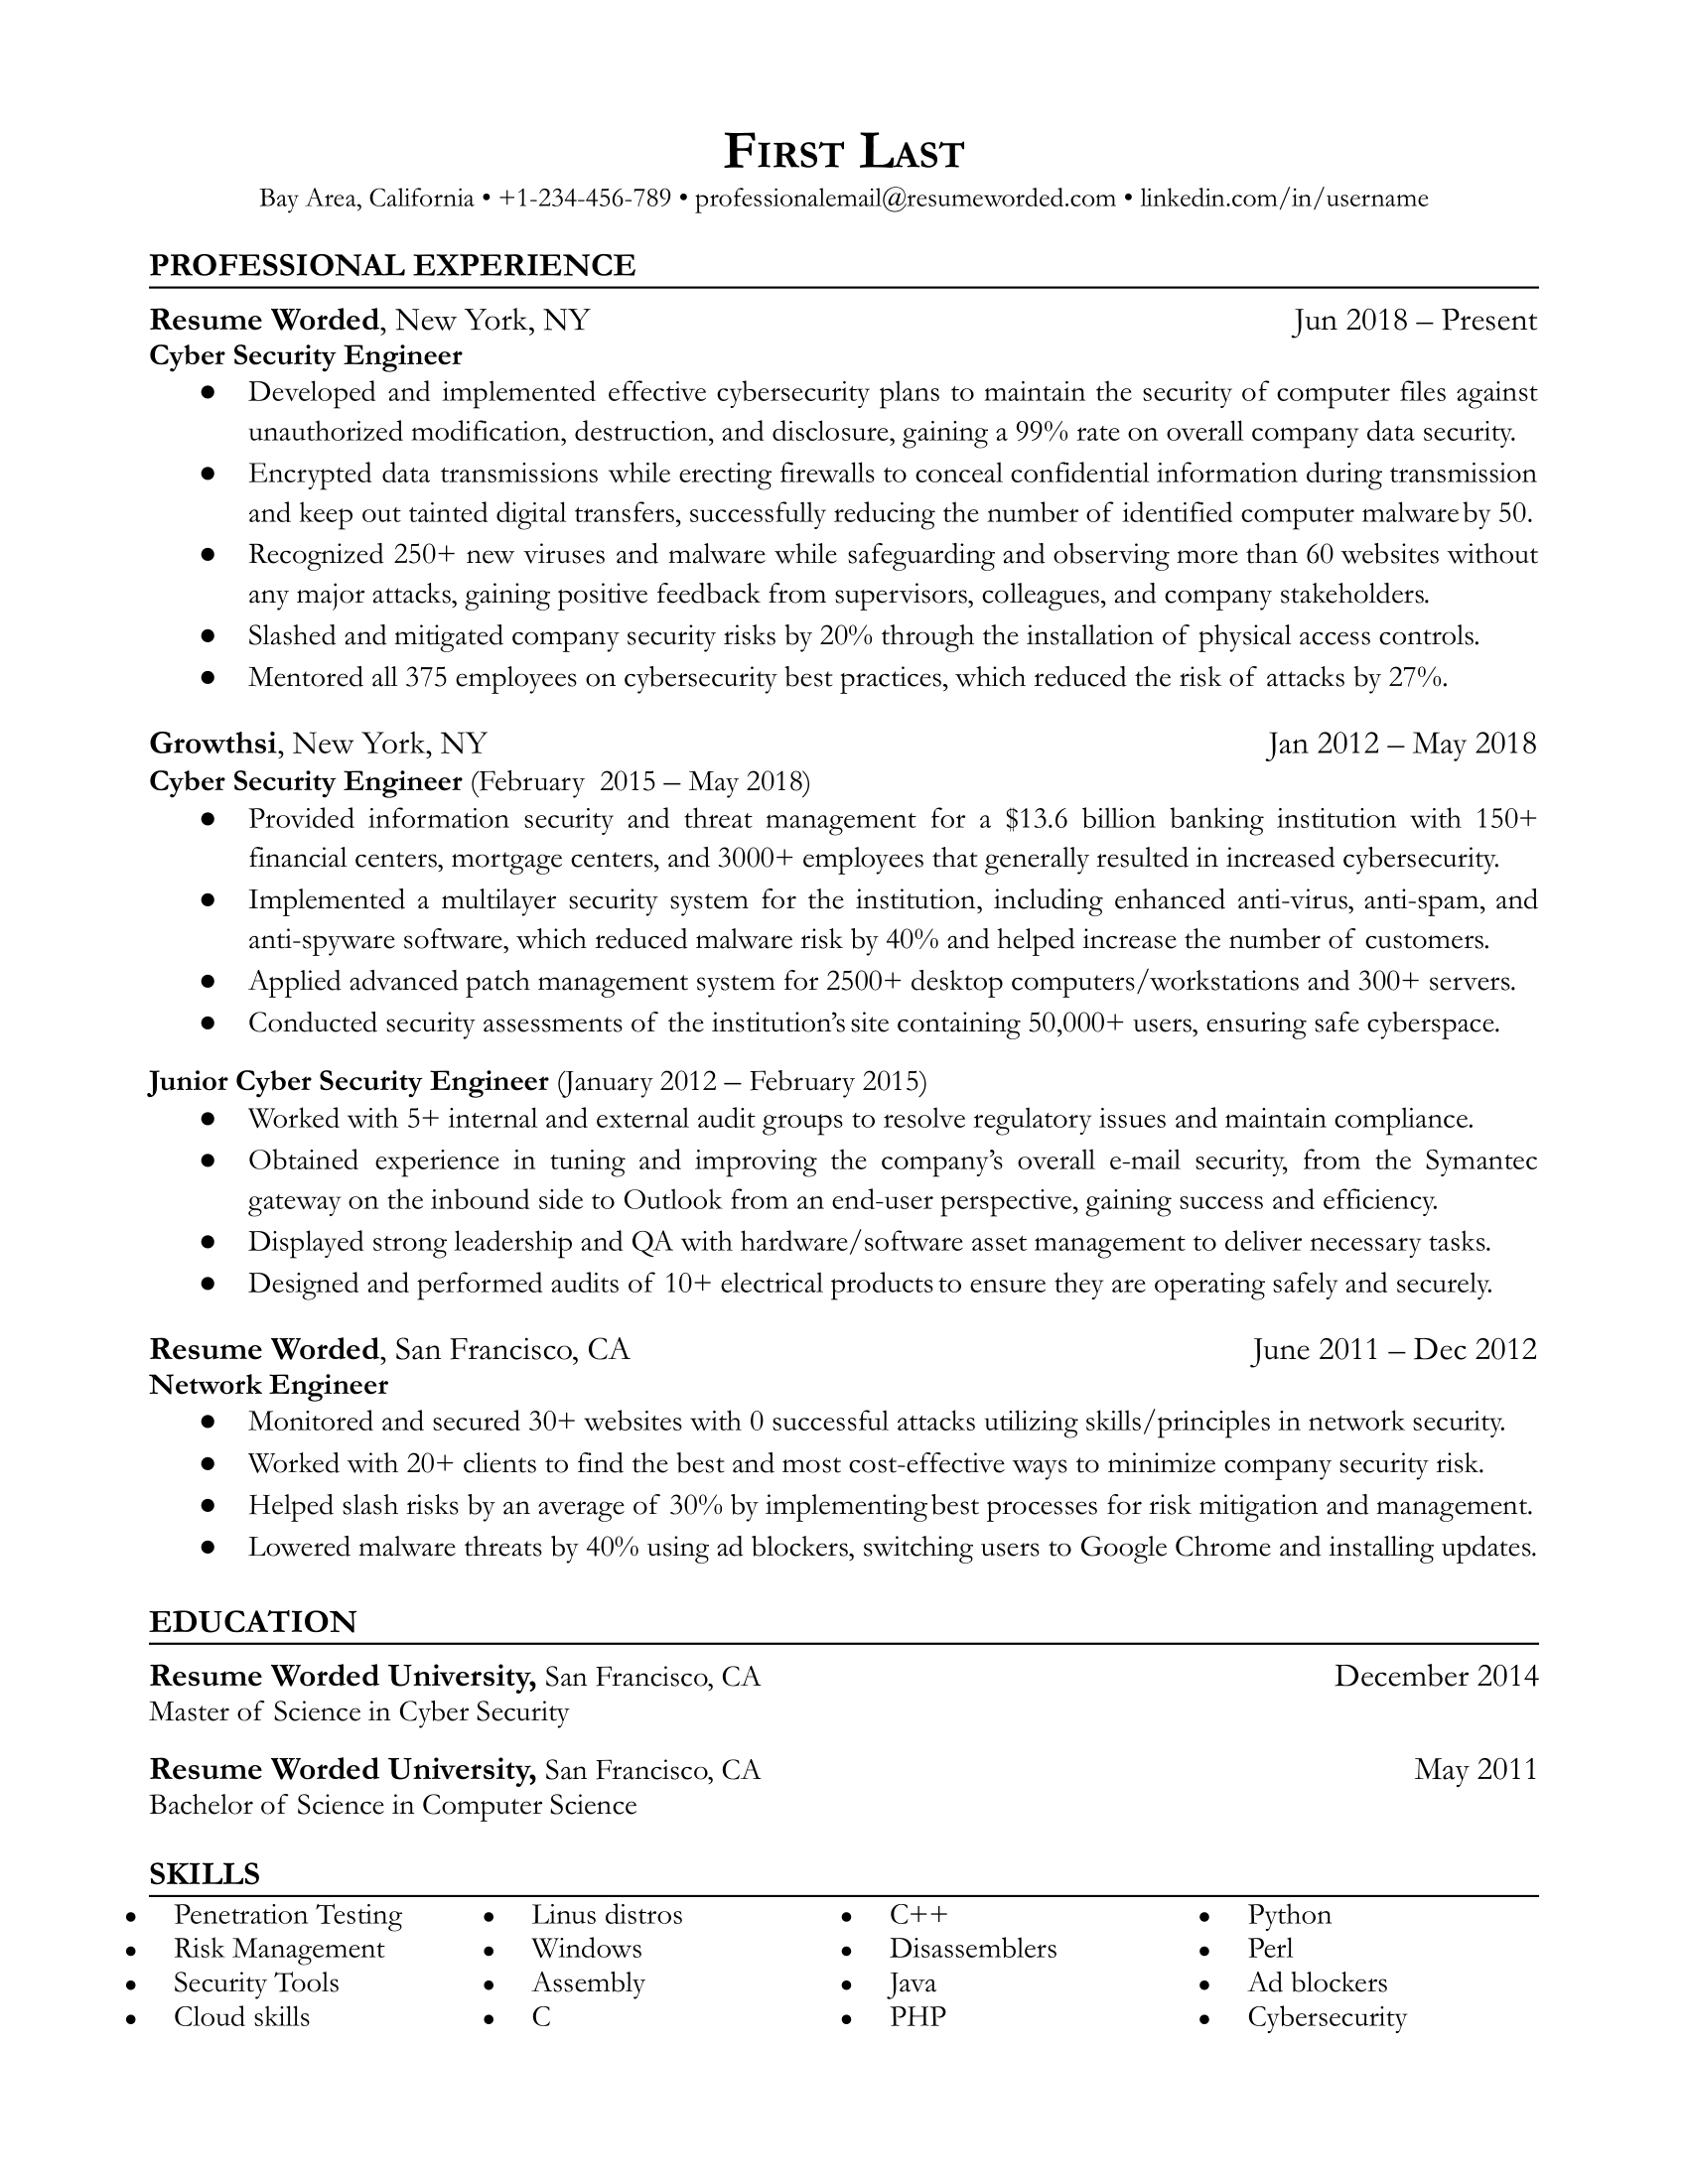 Cyber security engineering resume has specific keywords to get past ATS